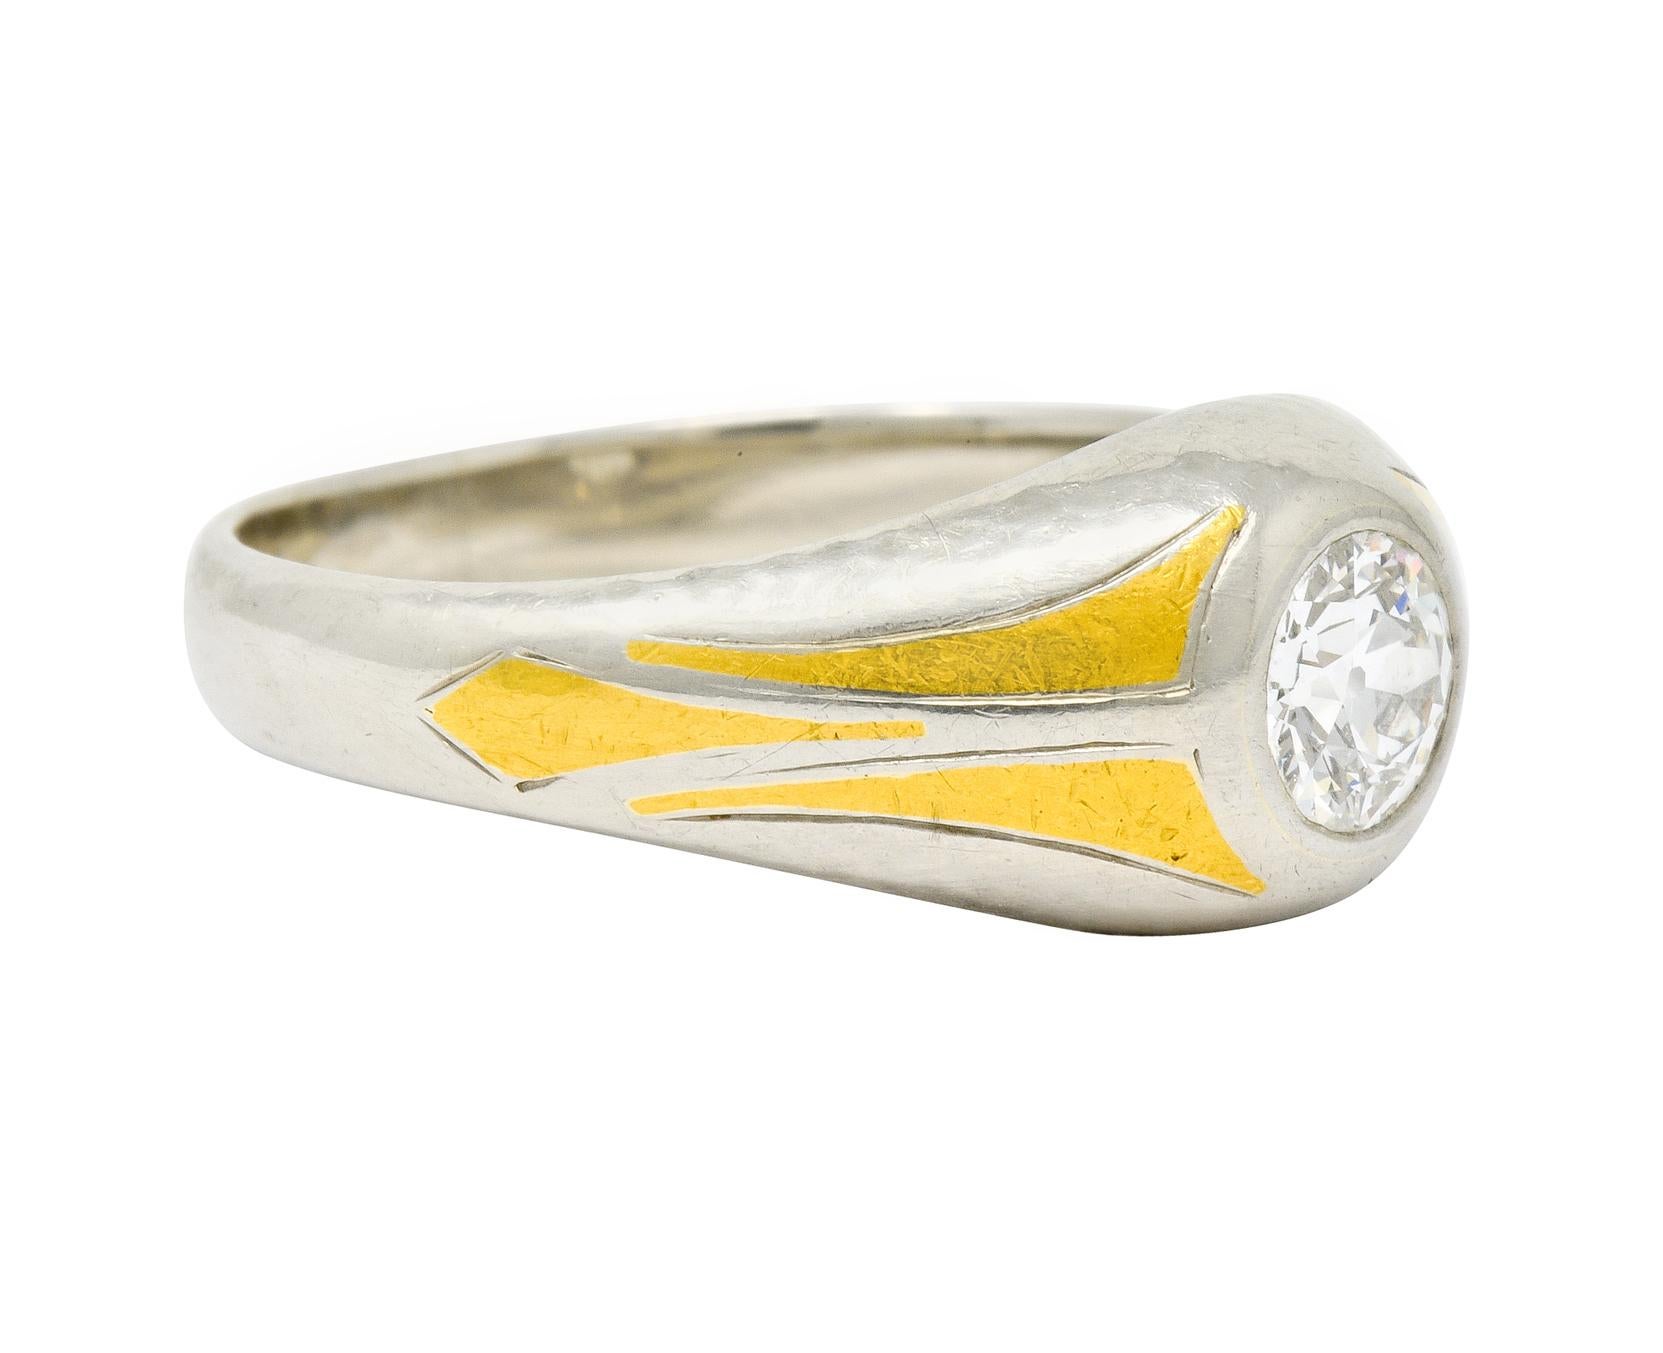 Centering an old European cut diamond weighing approximately 0.65 carats, G/H color with VS clarity

Bezel set low in mounting featuring geometric yellow gold inlay over hammered white gold

Tested as 14 karat gold 

Circa 1930's

Ring Size: 10 &